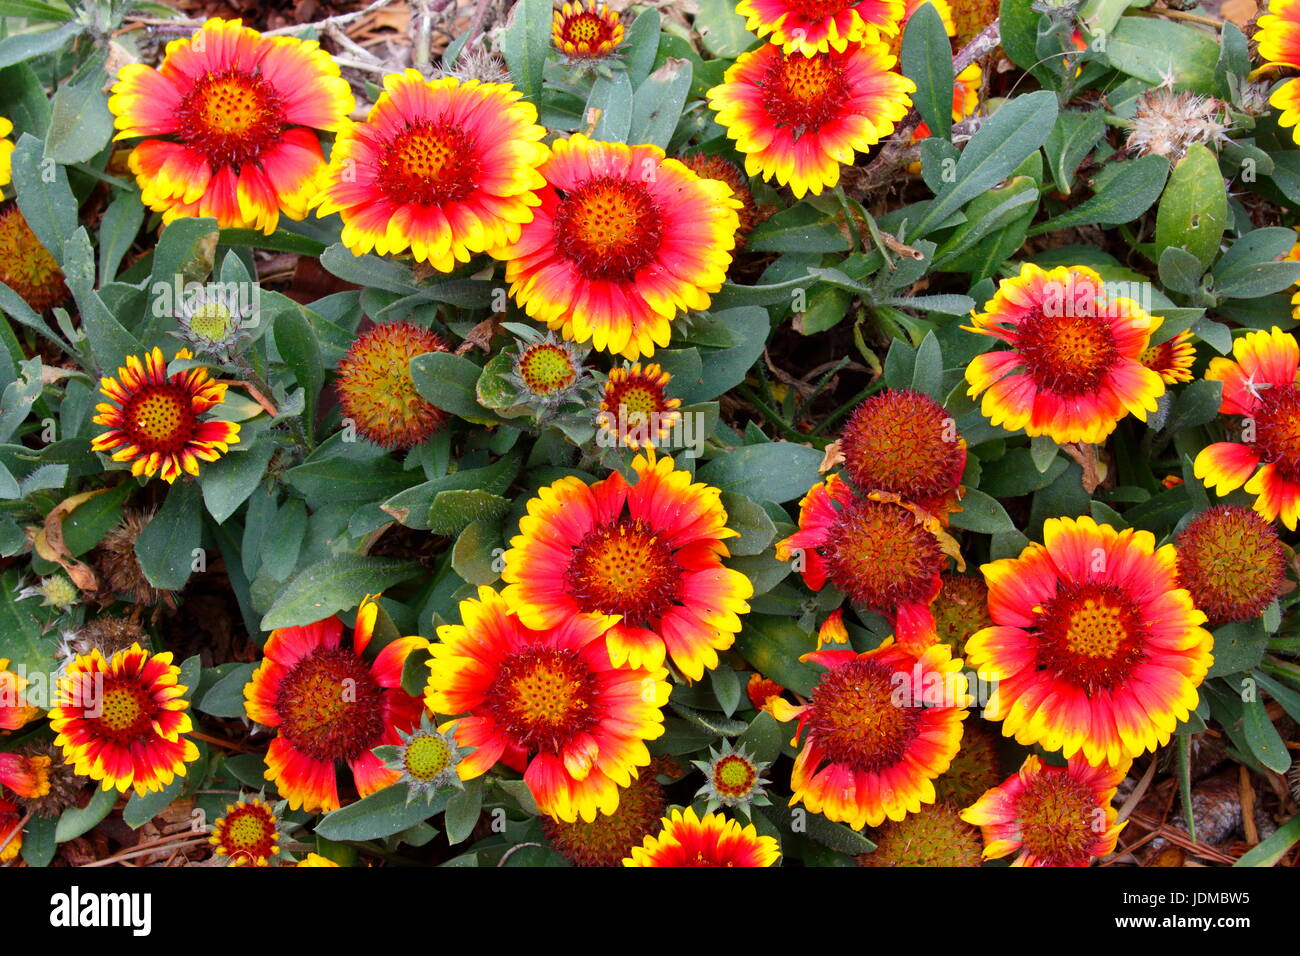 A large group of Indian blanket, Gaillardia pulchella, in full bloom. Stock Photo